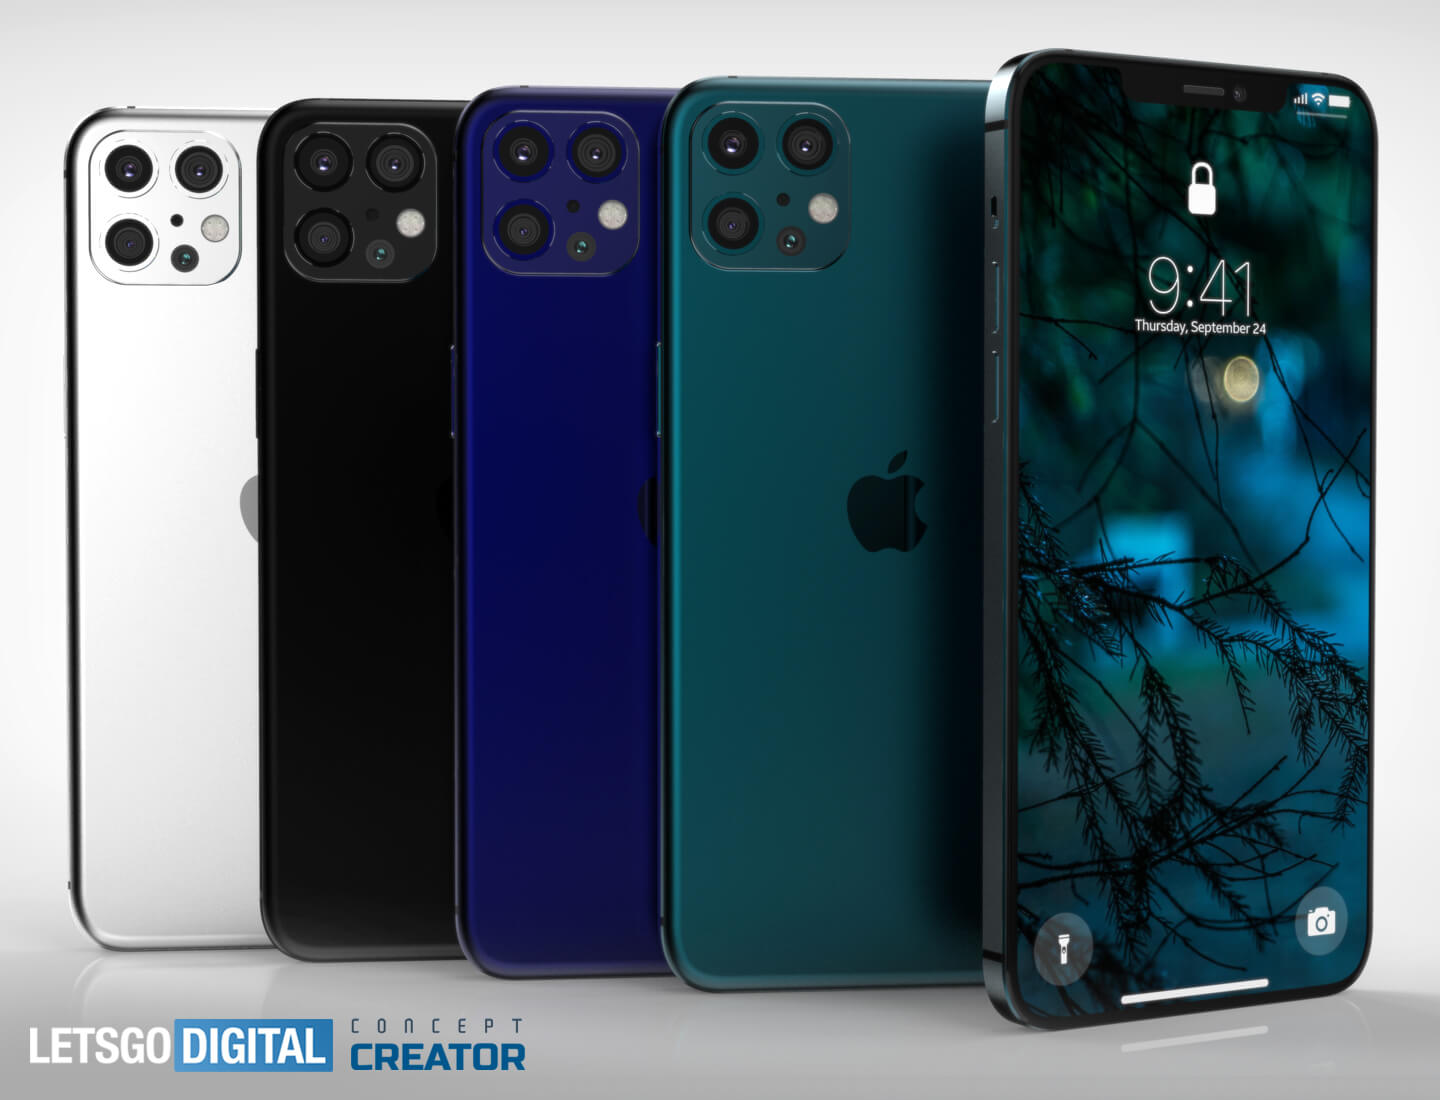 Iphone 12 Series Includes An Iphone Mini And 5g Support Letsgodigital